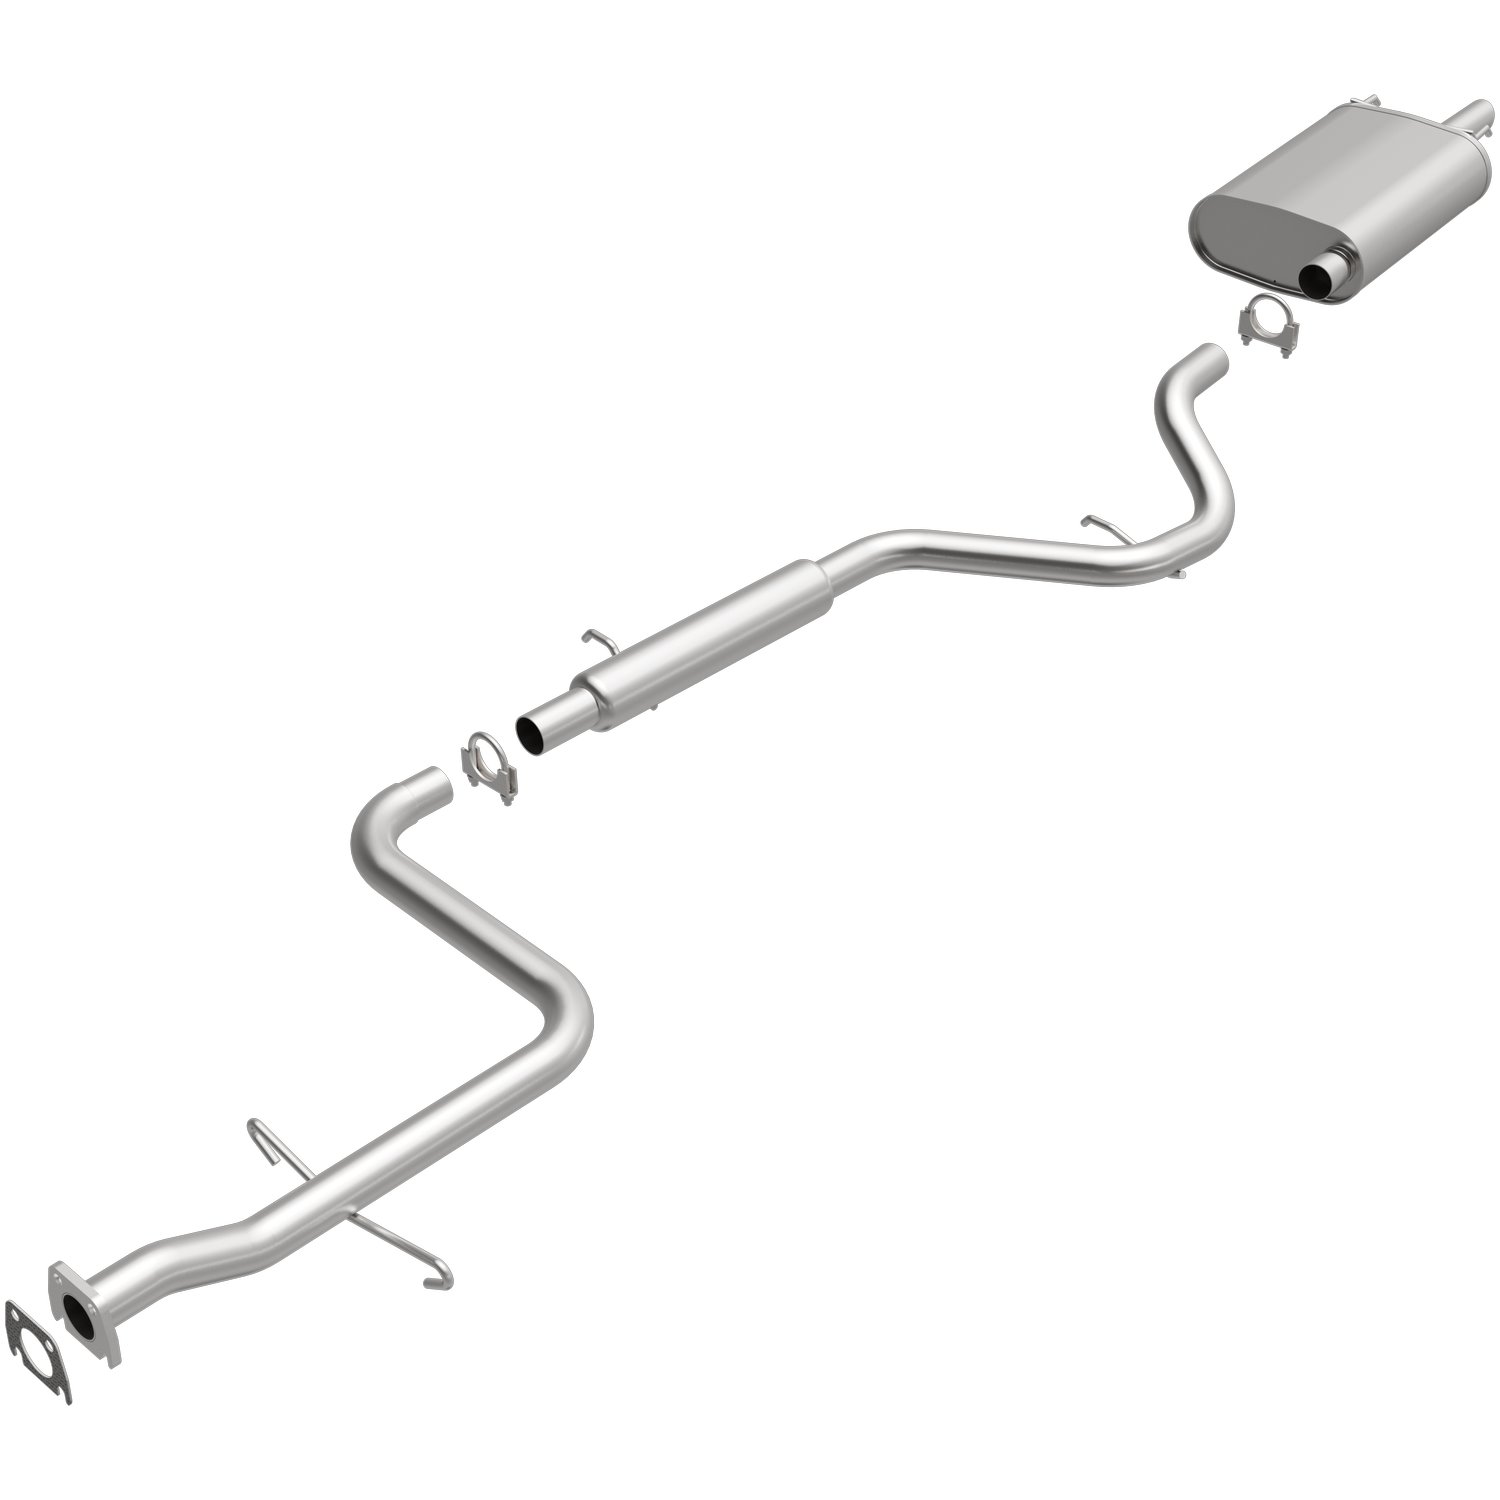 Direct-Fit Exhaust Kit, 1995-2001 Chevy Lumina/Monte Carlo 3.1L